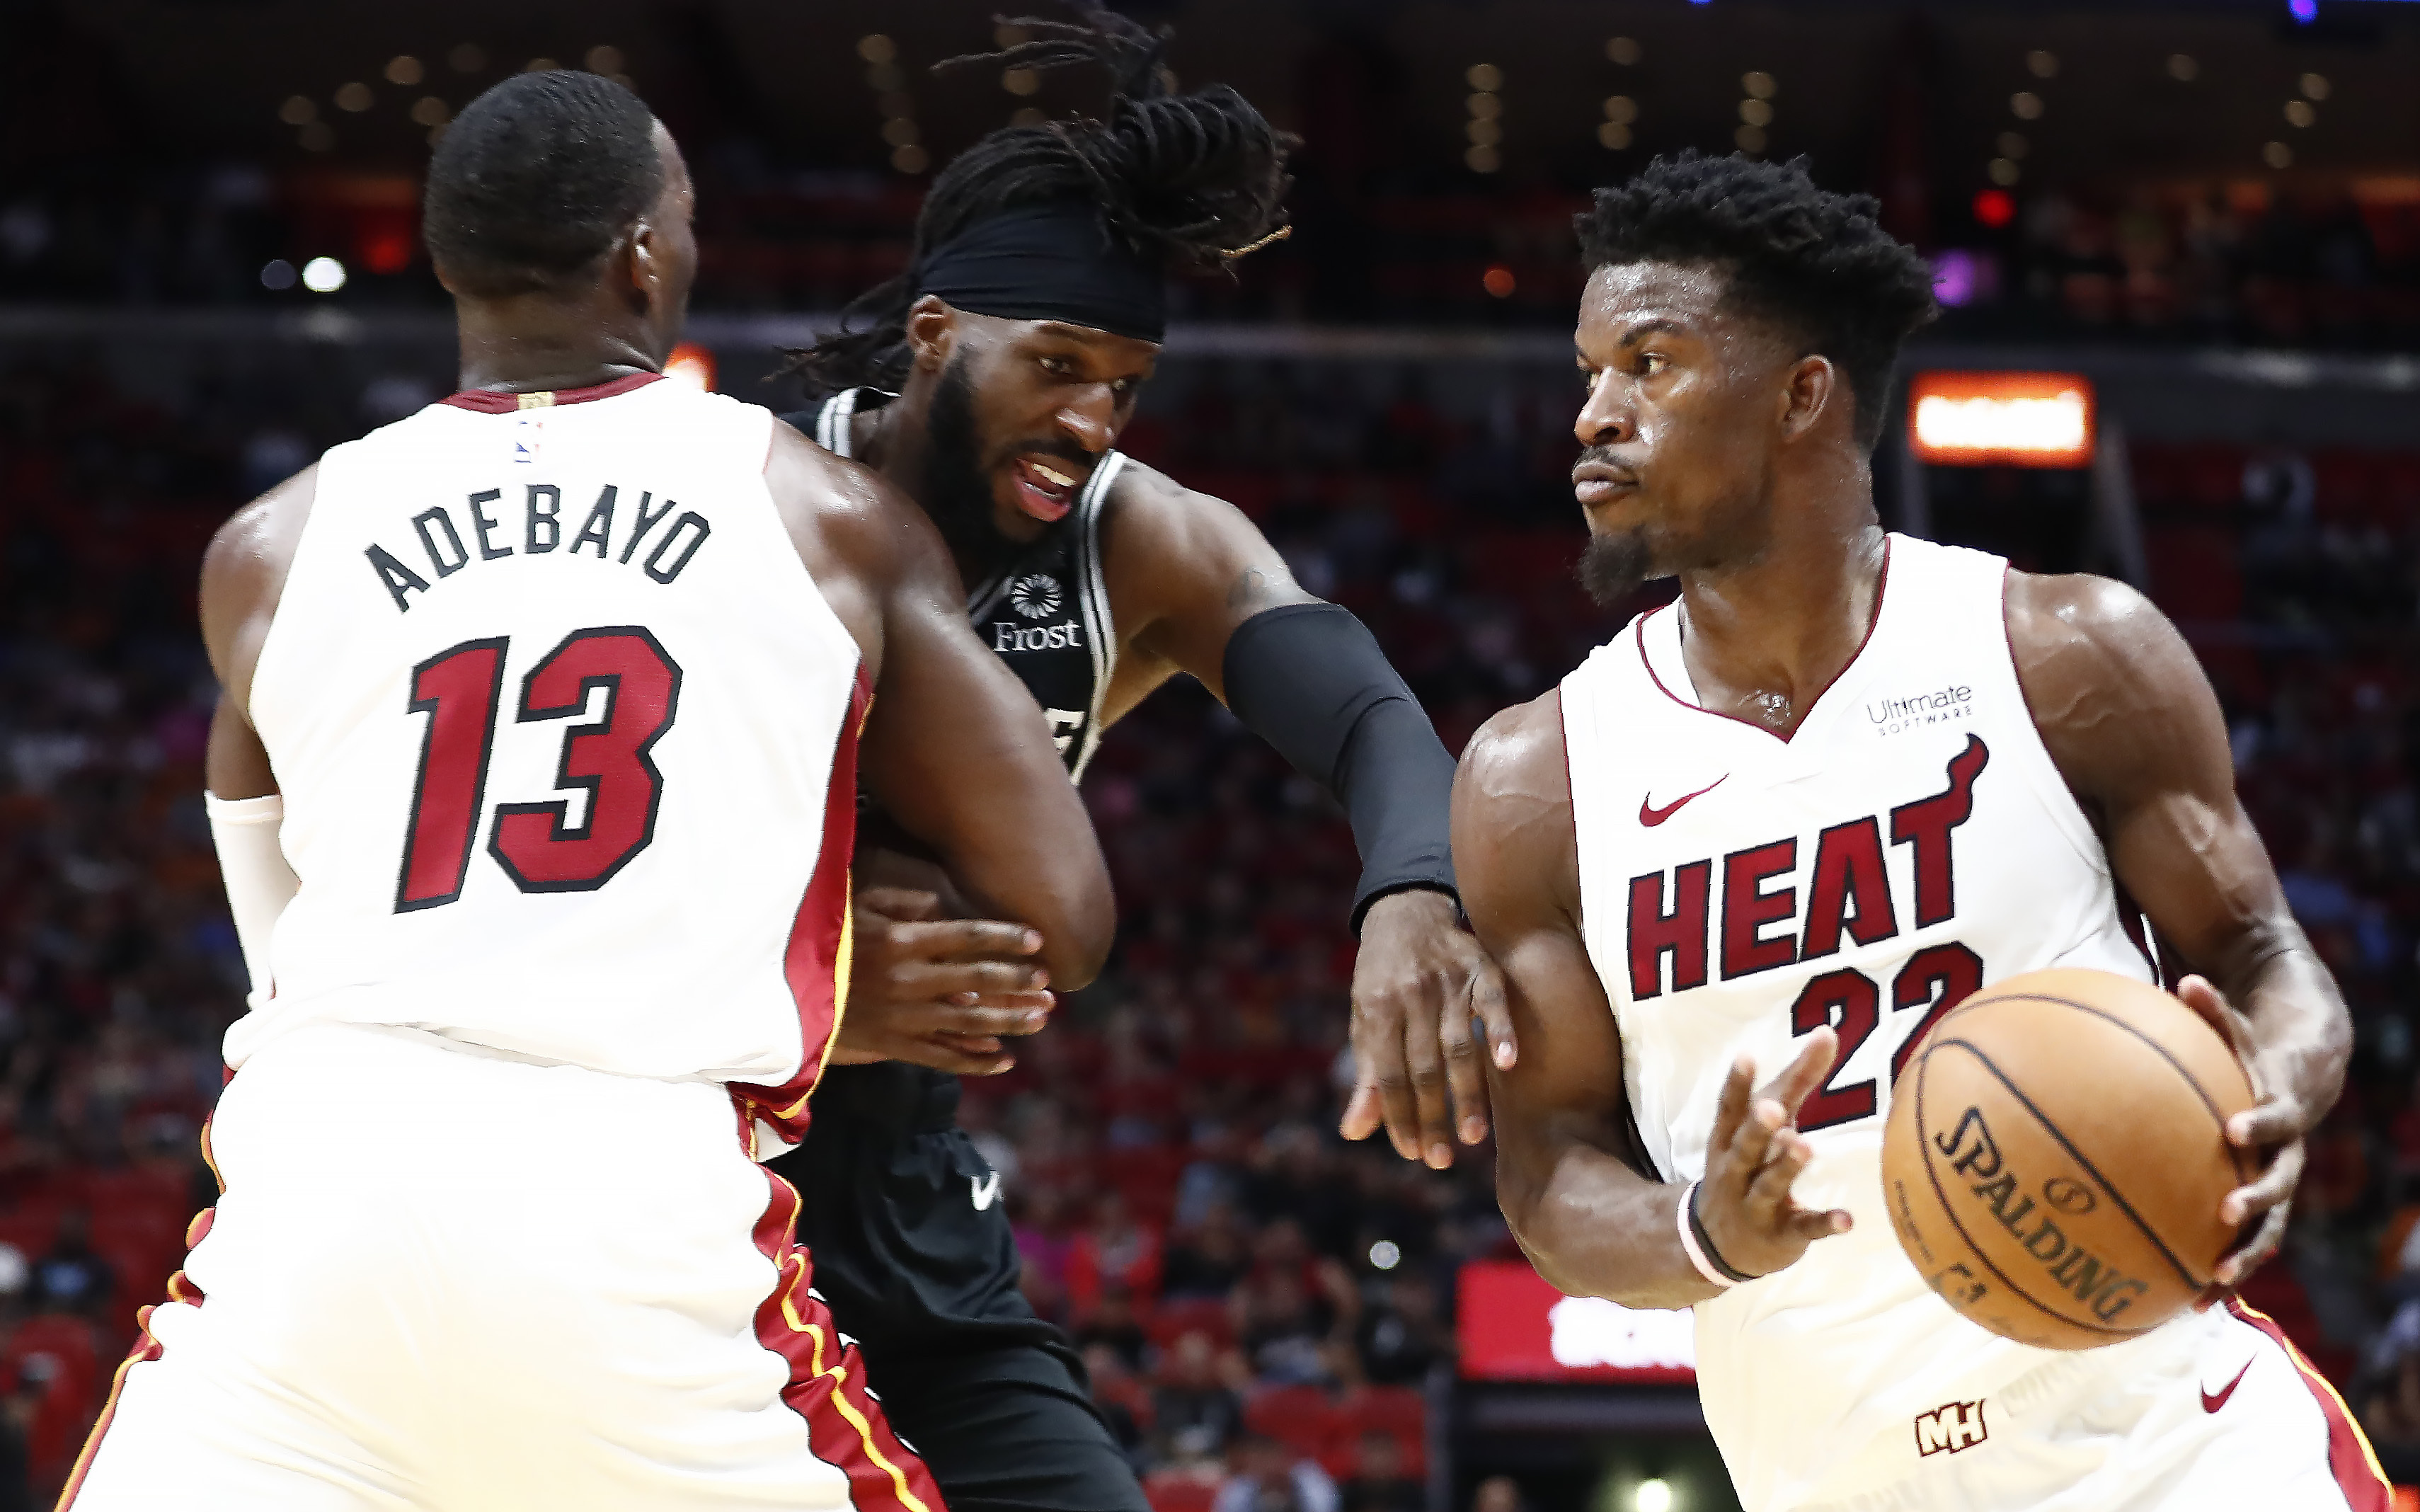 Jimmy's era: Butler arrives in Miami, and Heat hopes soar